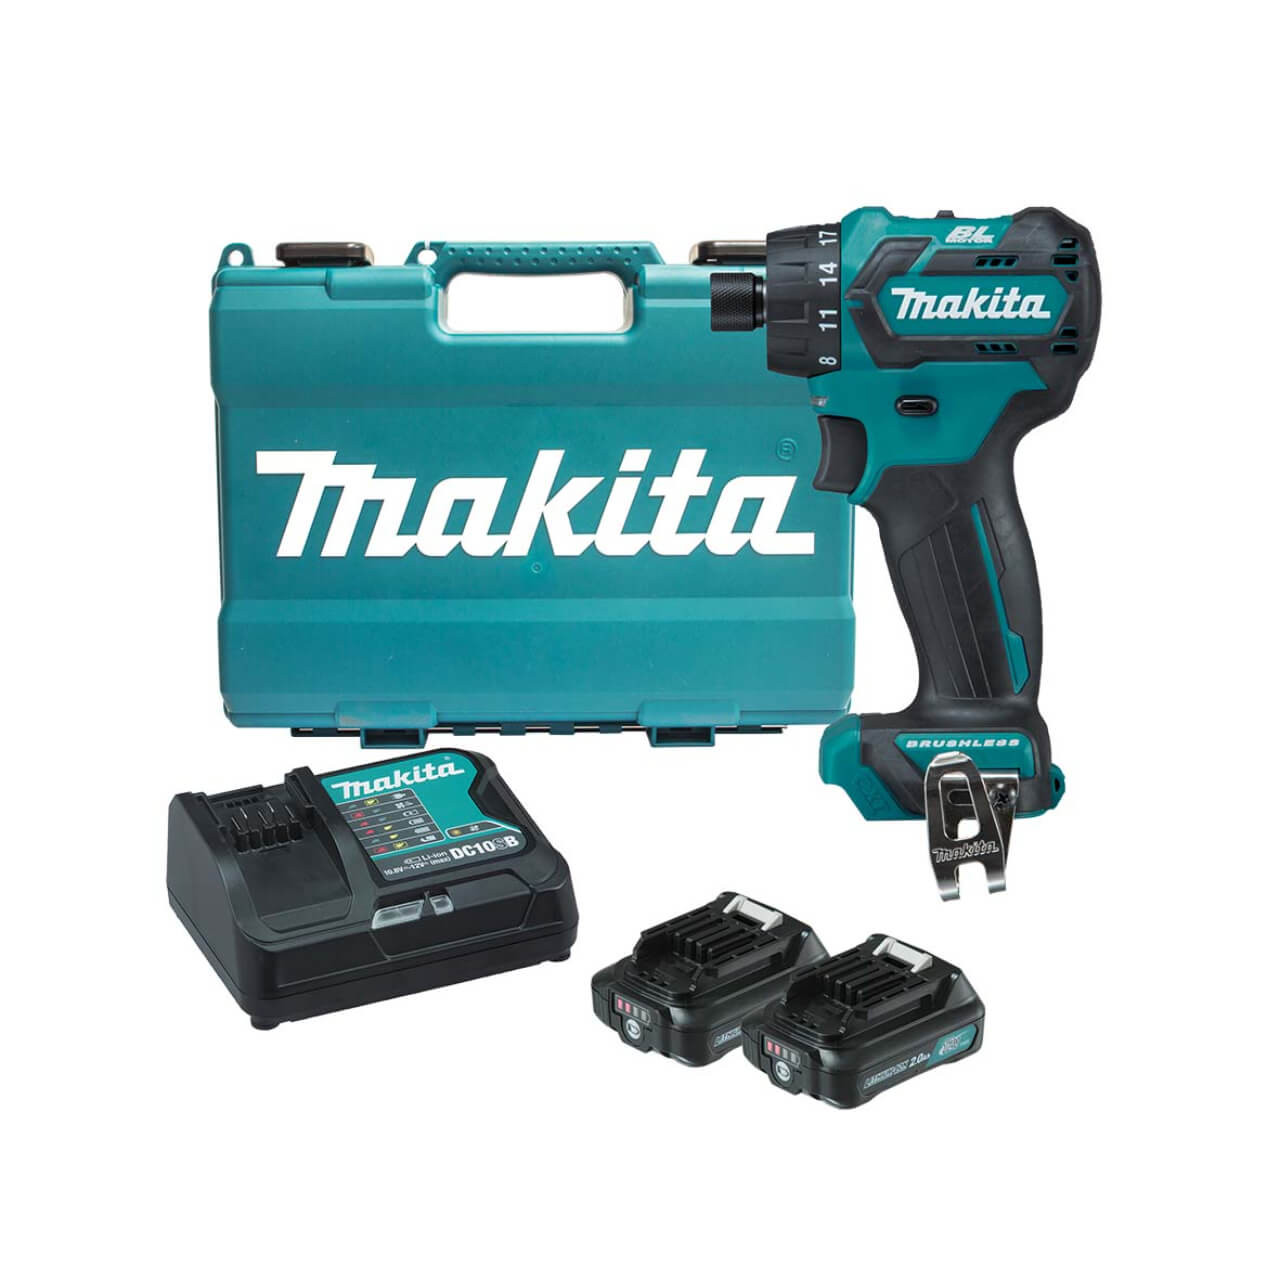 Makita 12V Max BRUSHLESS 1/4” Hex Chuck Driver Drill Kit - Includes 2 x 2.0Ah Batteries. Rapid Charger & Case